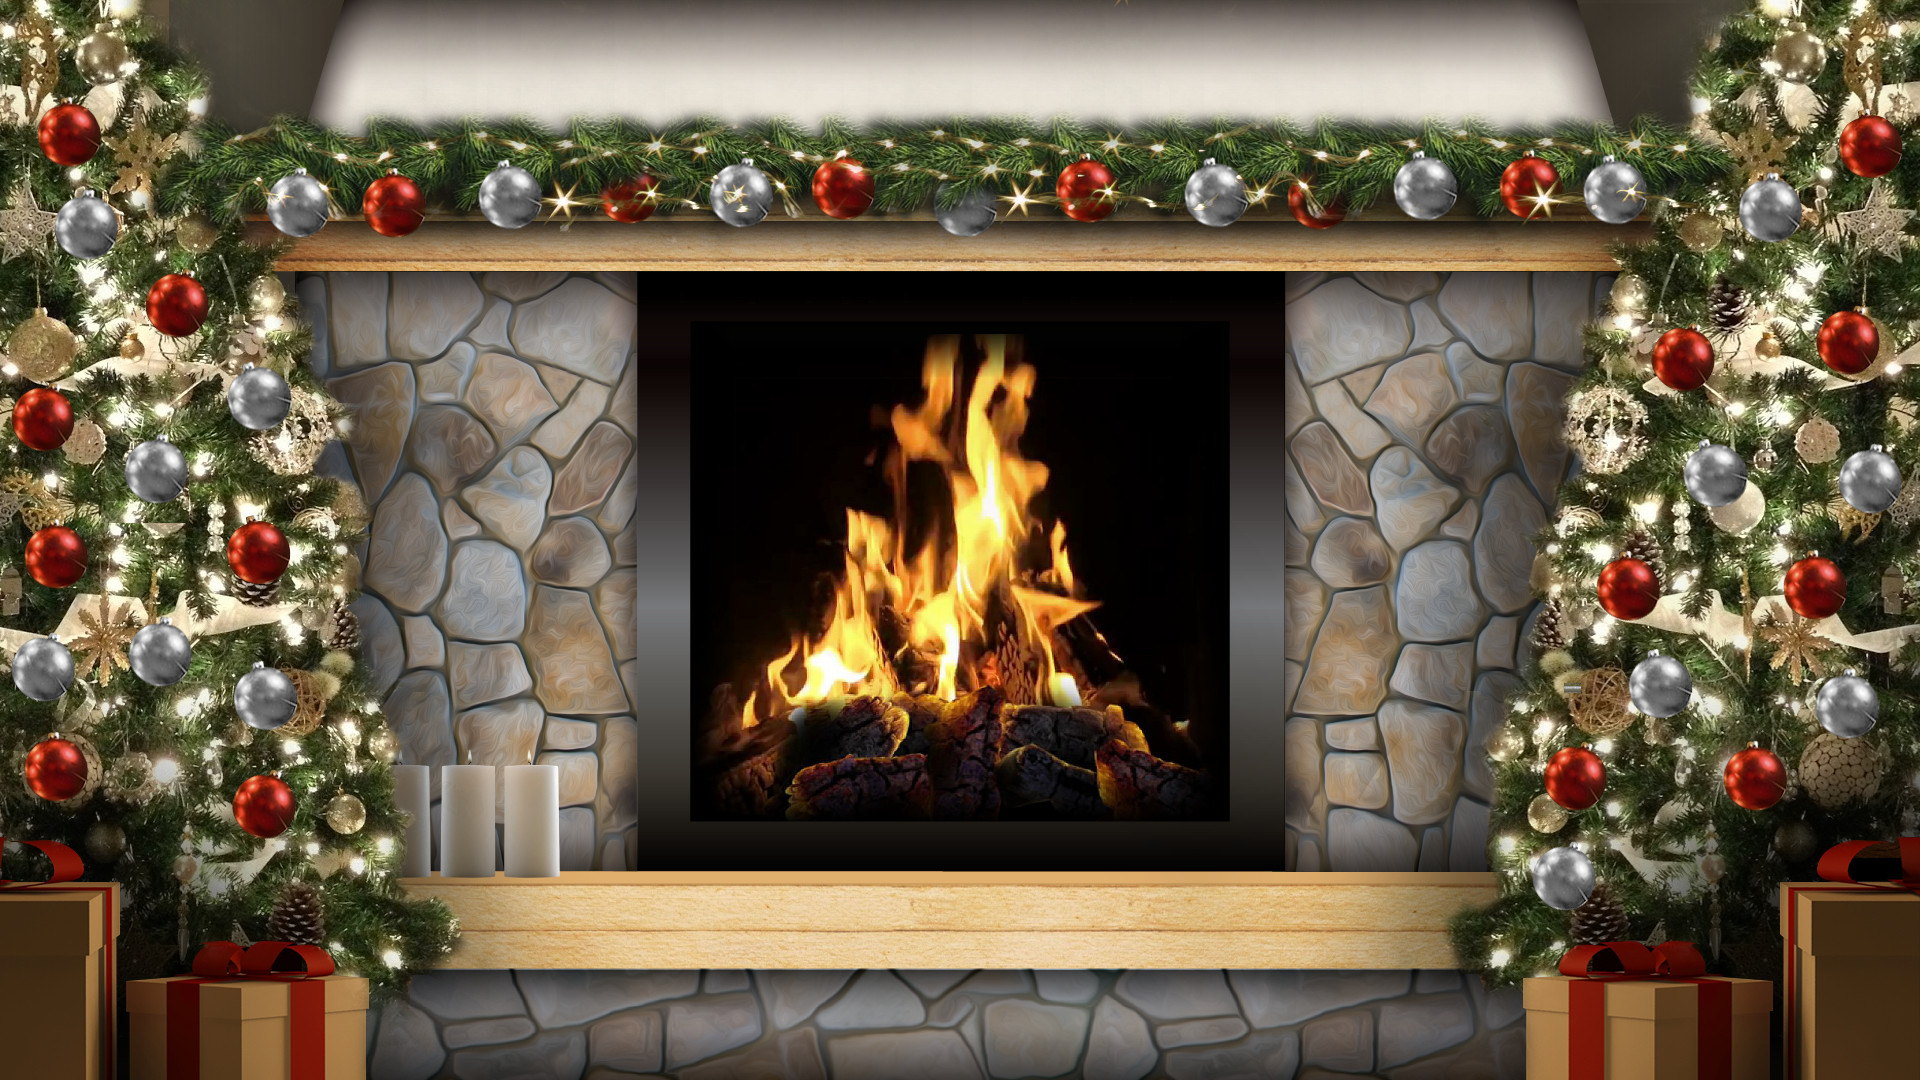 Christmas Background Fireplace
 Amazing Christmas Fireplaces App Ranking and Store Data